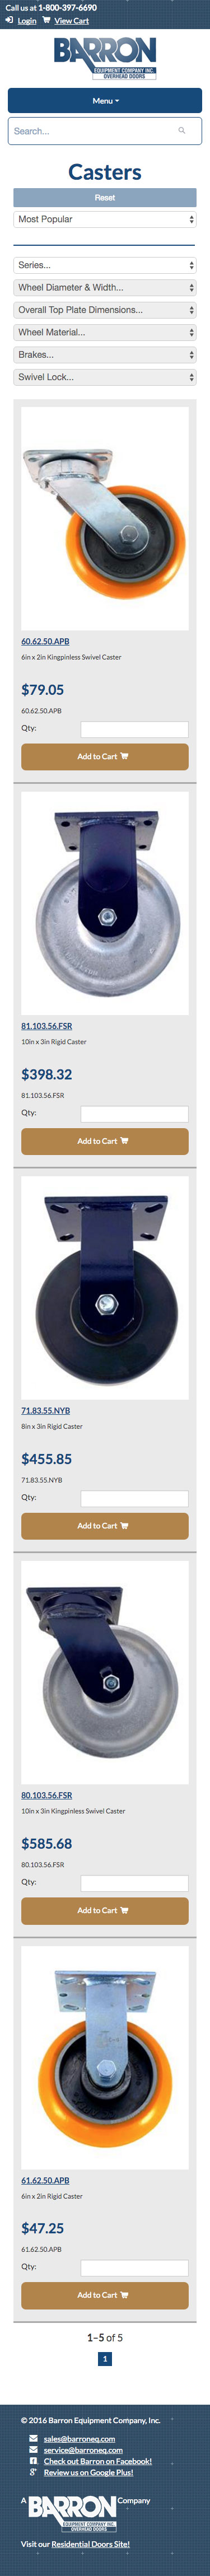 Barron Equipment website screenshot of mobile casters filter page